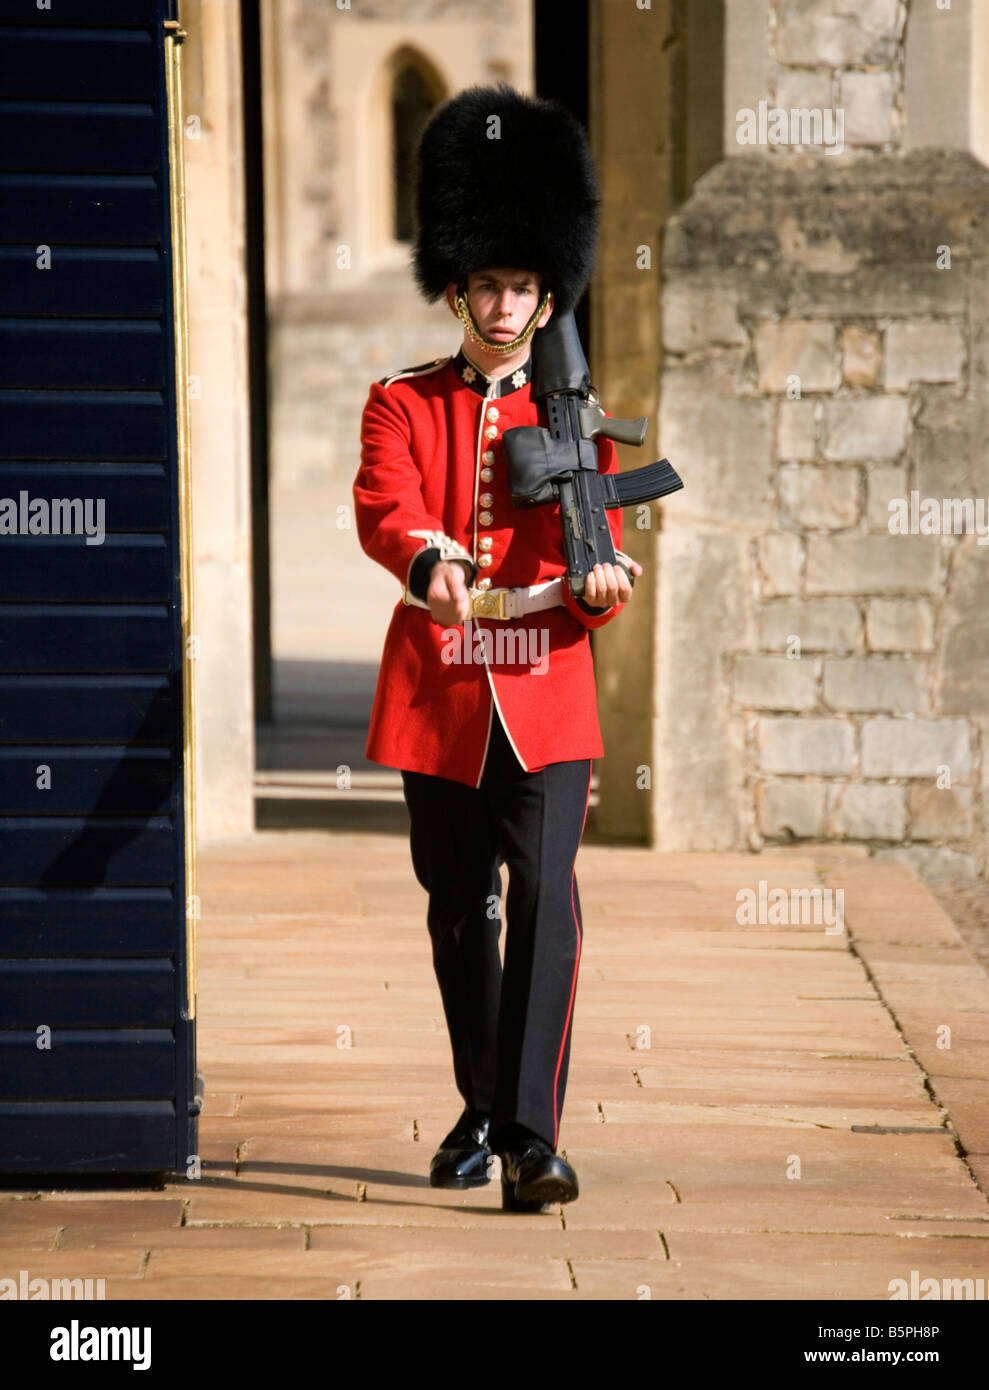 Queens Guard marching at Windsor Castle, United Kingdom Stock Photo